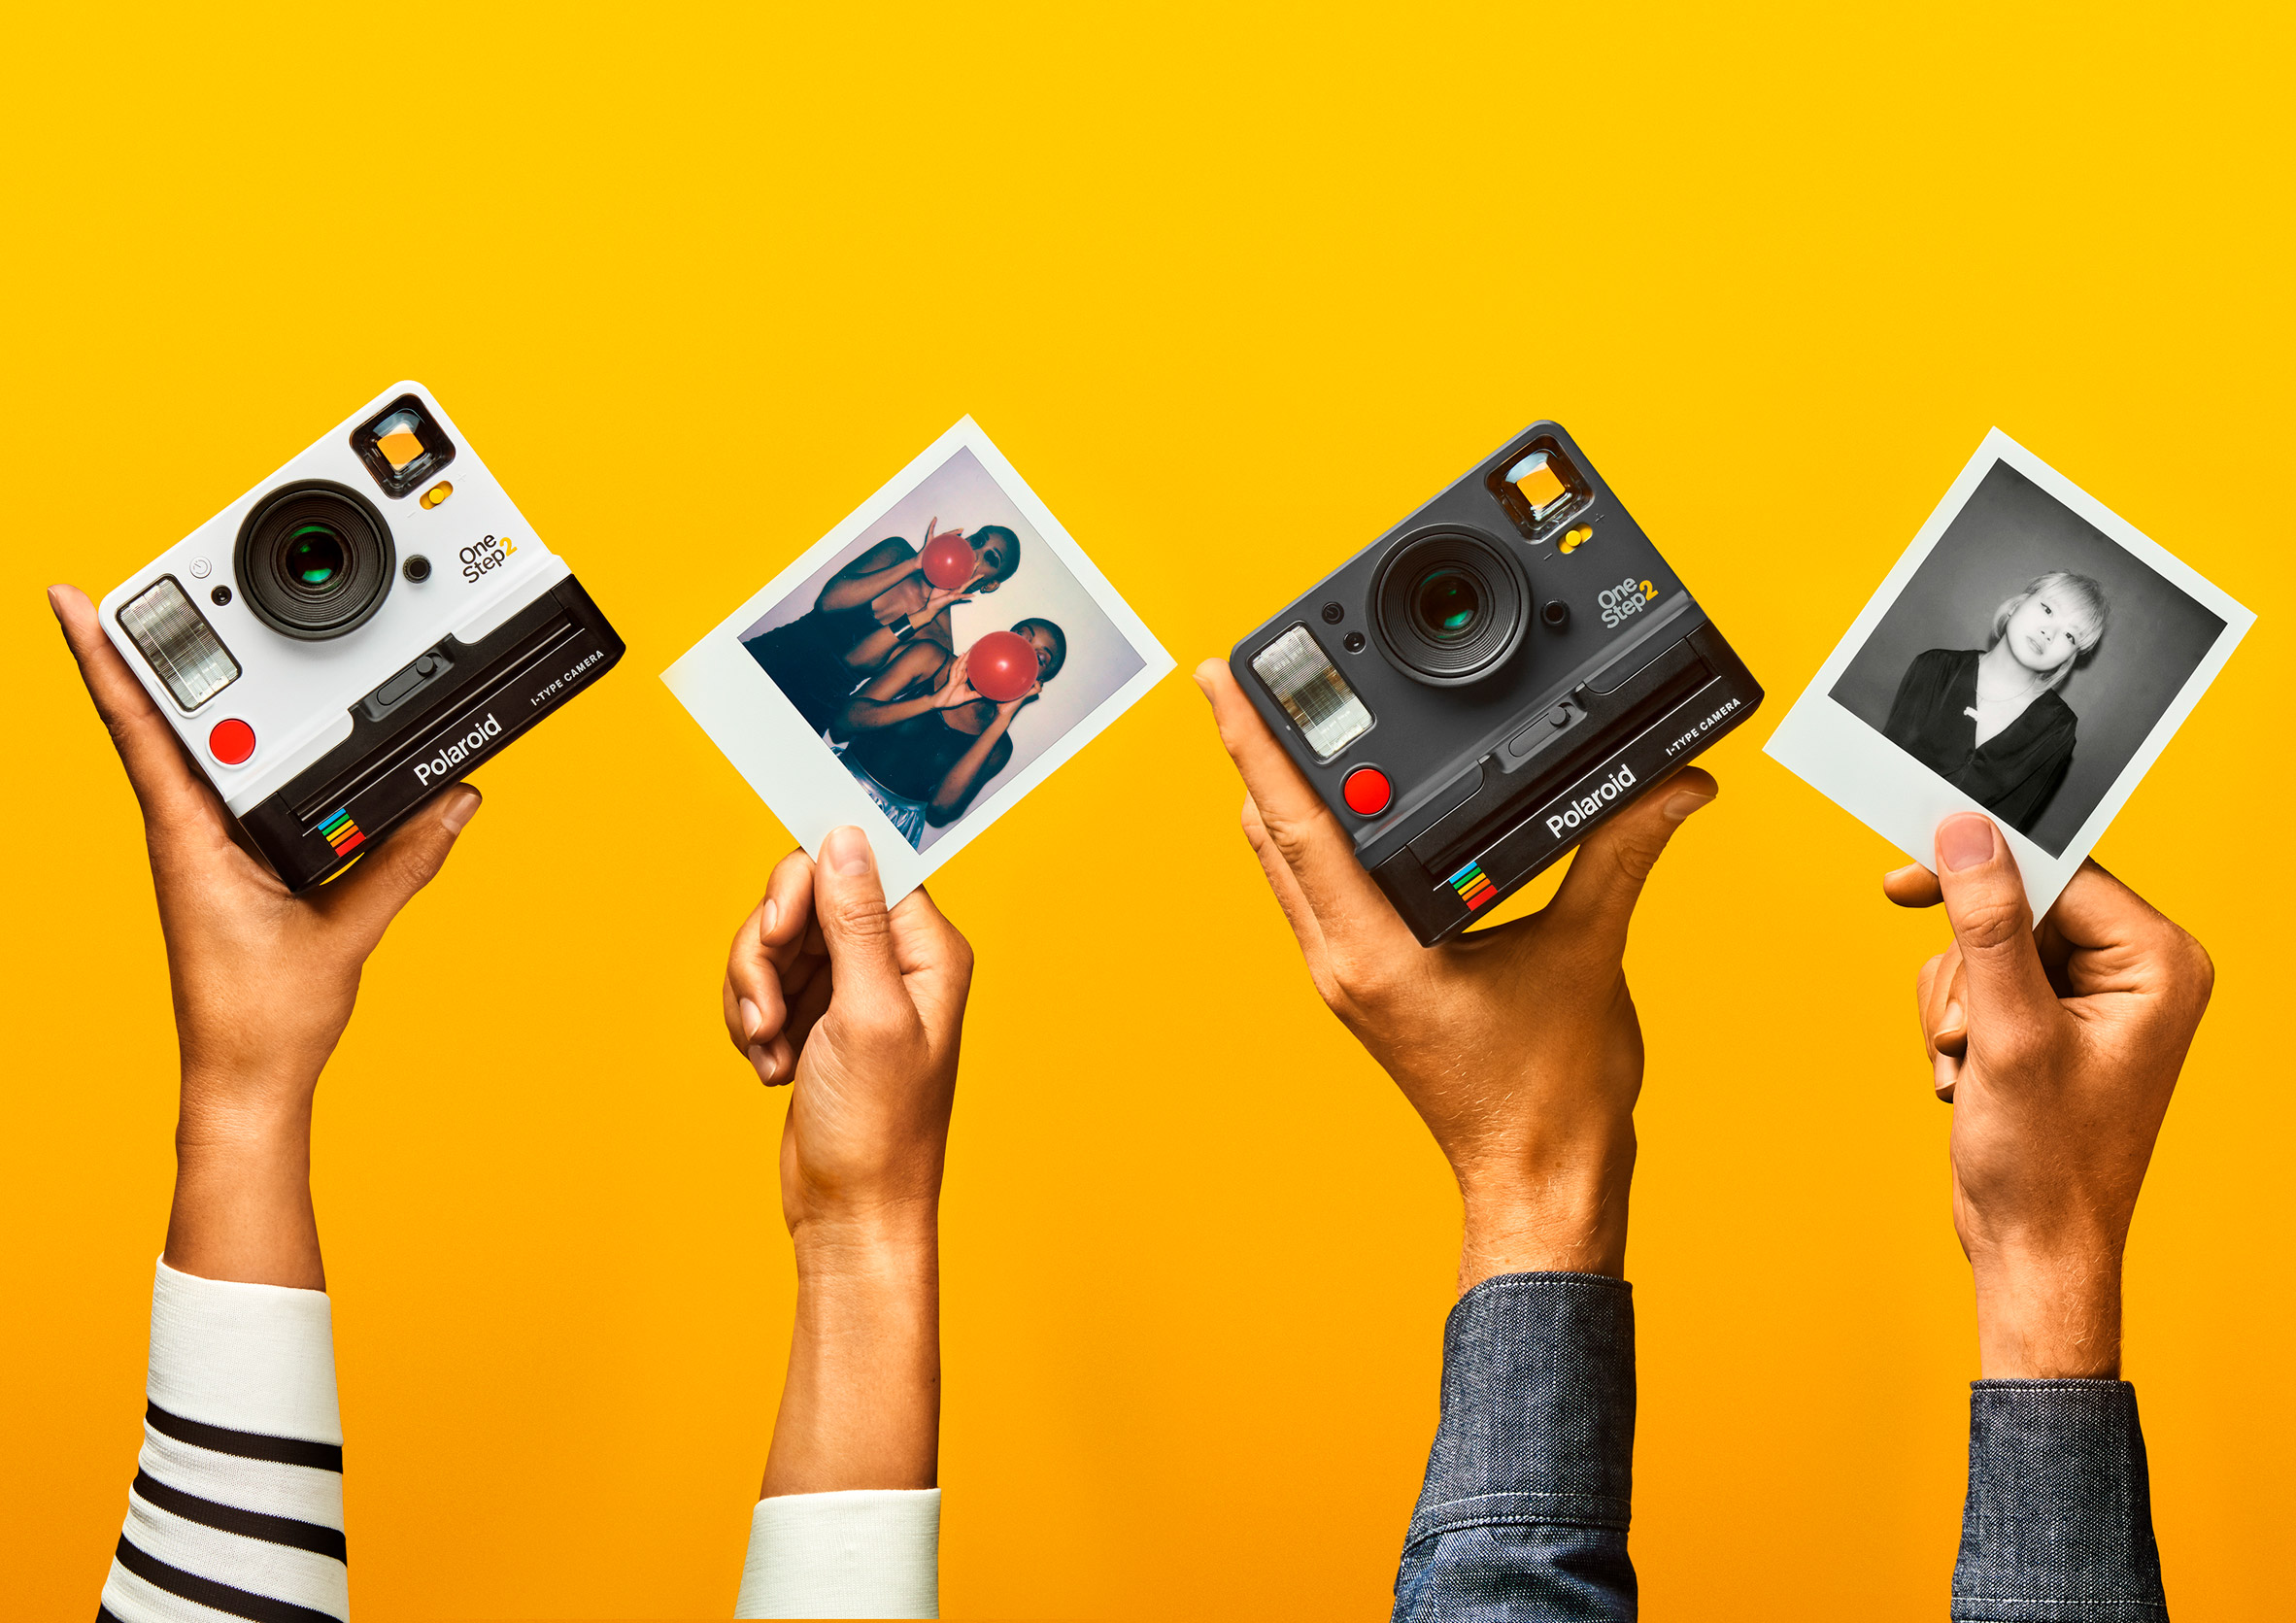 Polaroid Originals is a new company that is releasing a new analogue instant camera, the Polaroid OneStep 2.